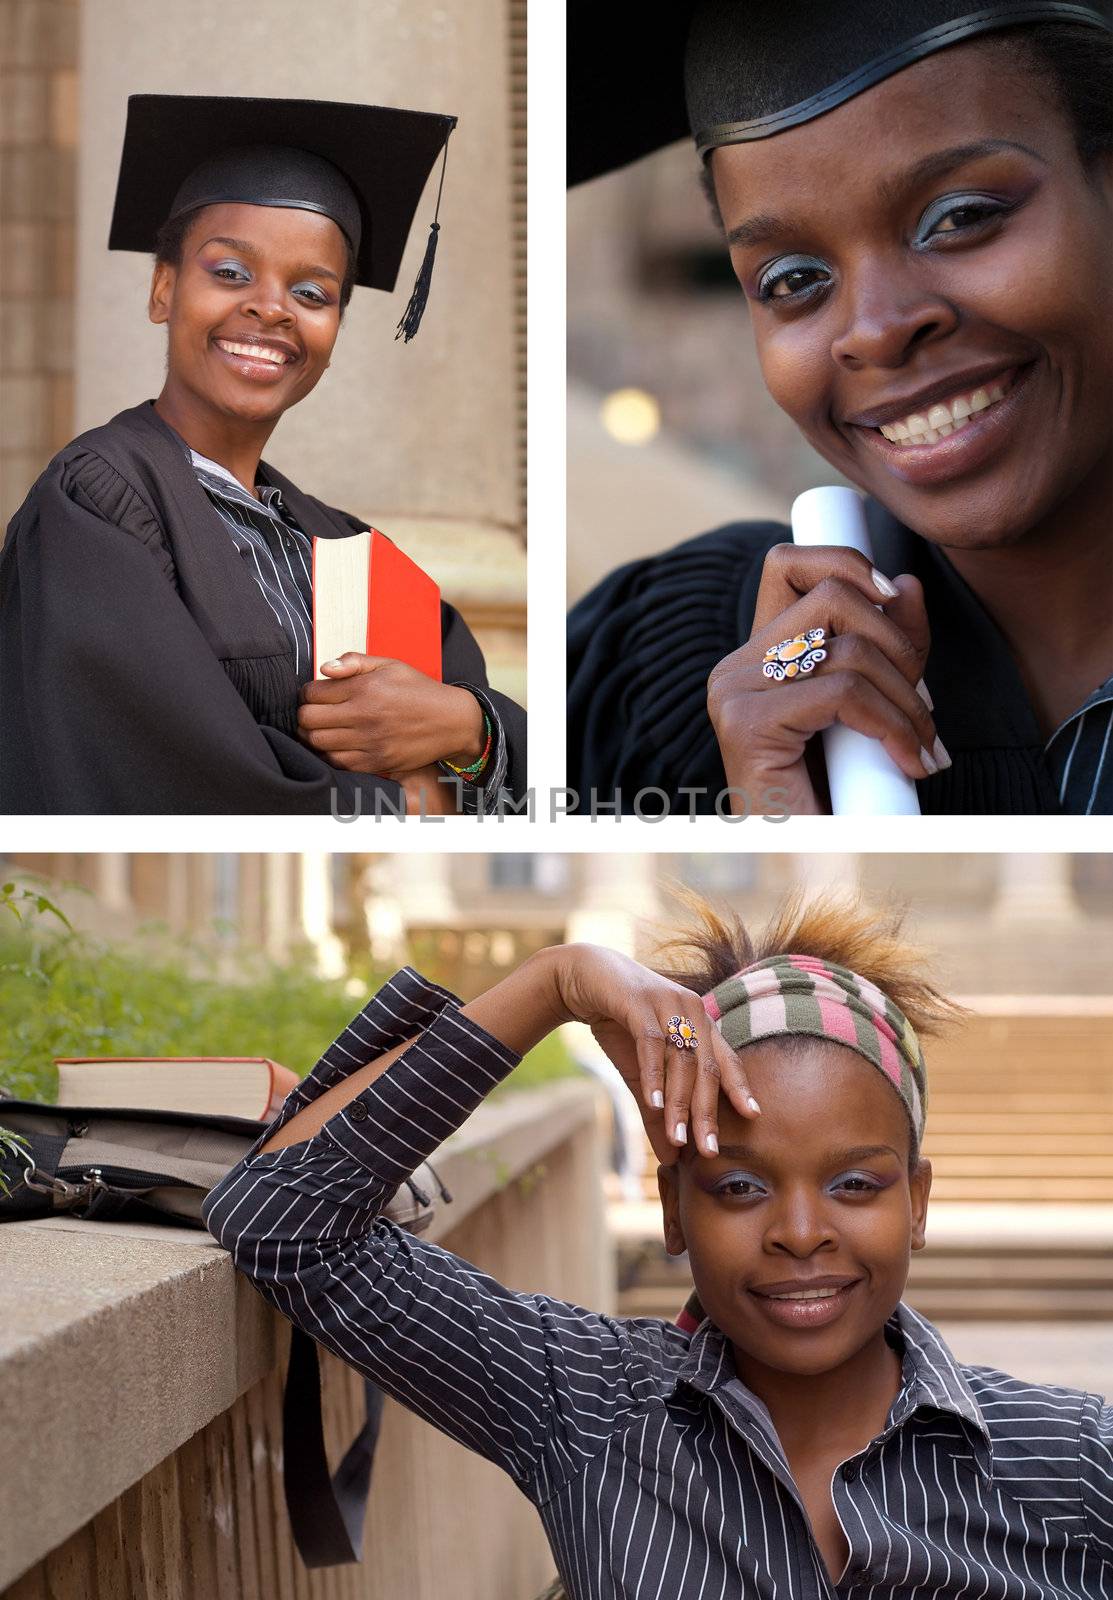 African American College Student Collage by alistaircotton